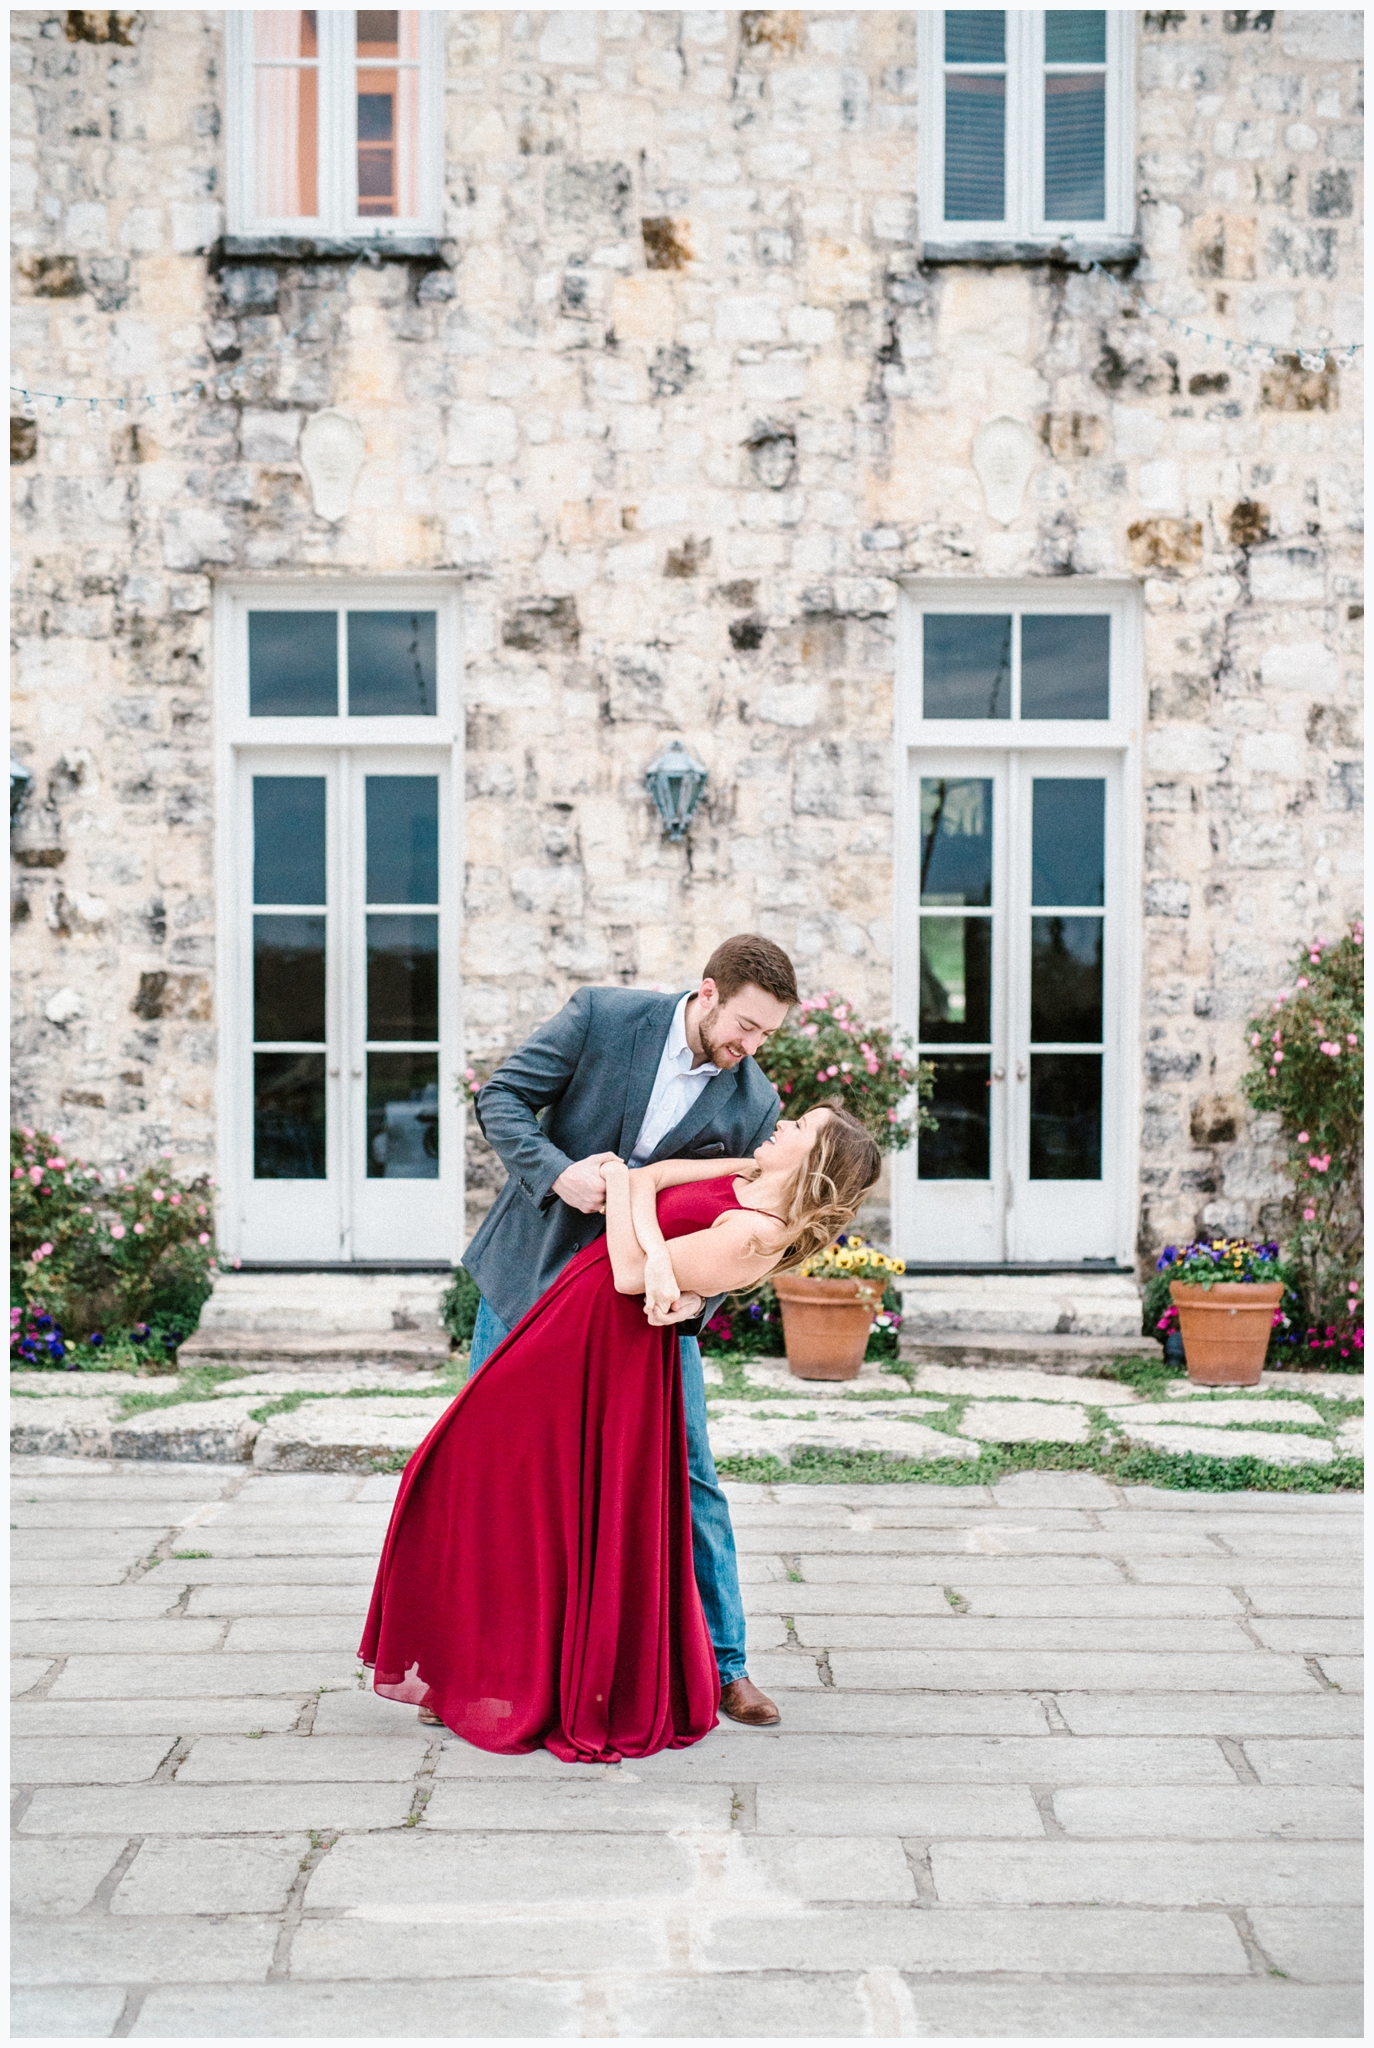 joslyn-holtfort-photography-engagement-session-le-san-michele-buda-texas_0020